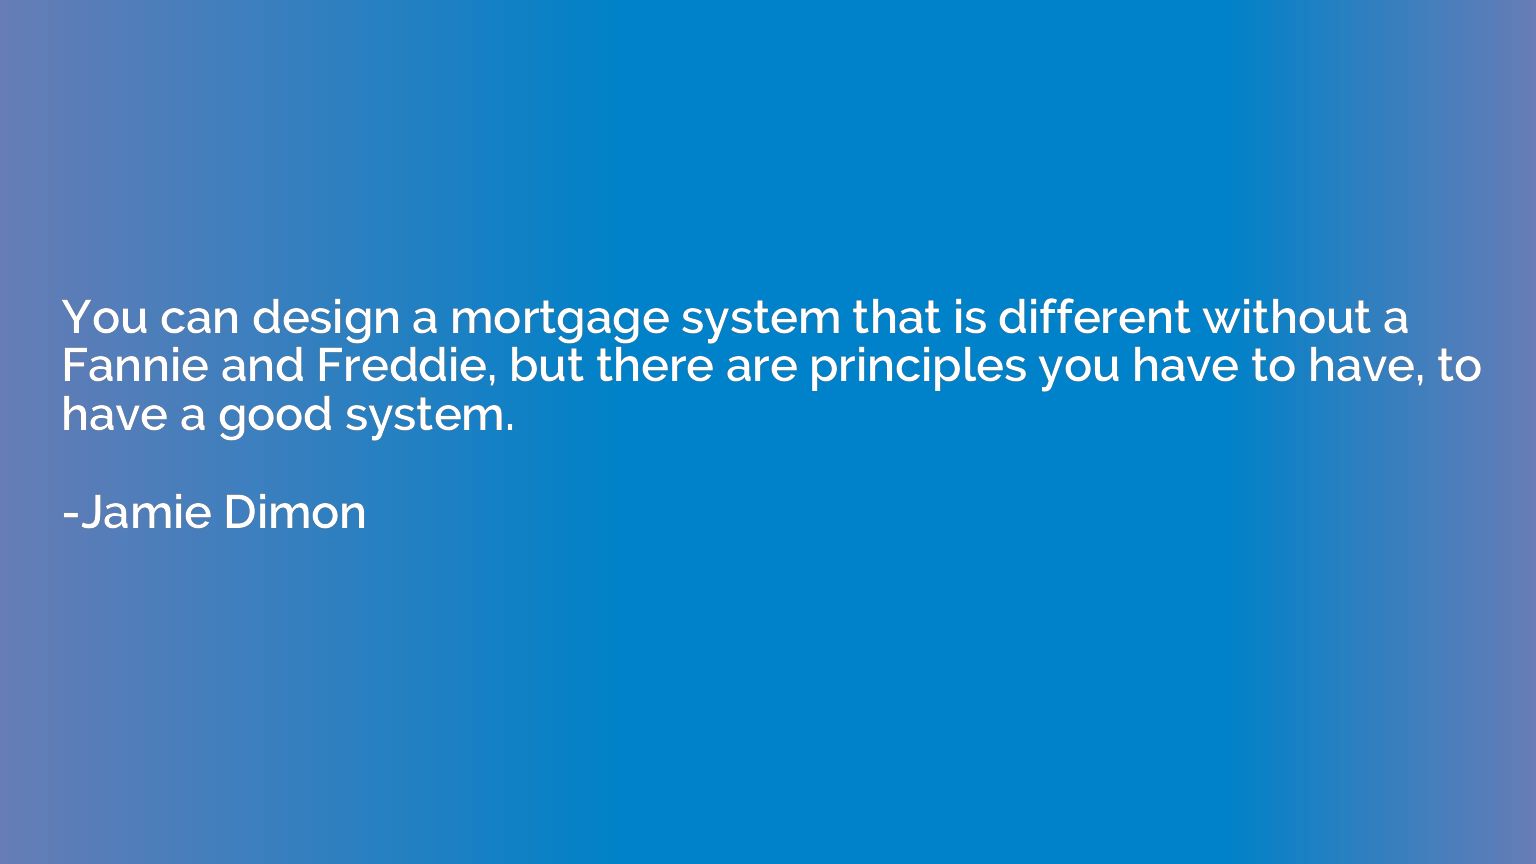 You can design a mortgage system that is different without a